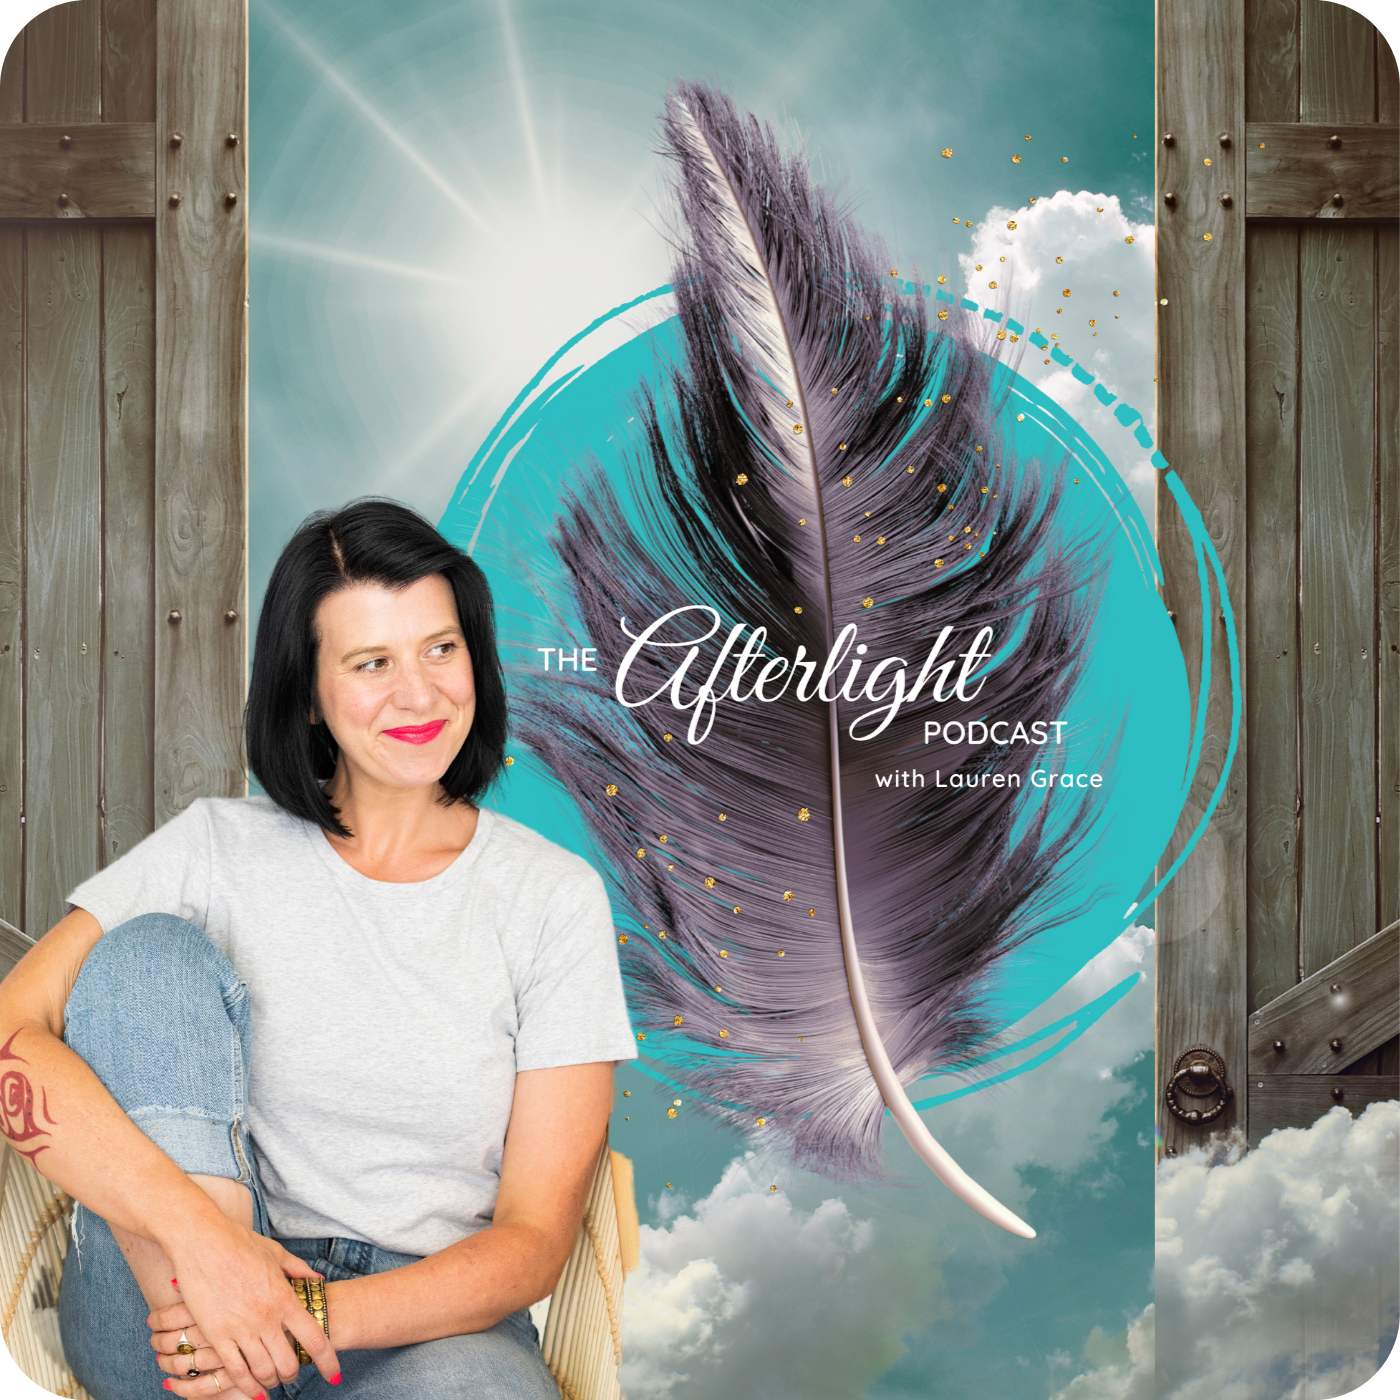 NEW website Podcast logo (1400 x 1400 px) The Afterlight Podcast with Lauren Grace